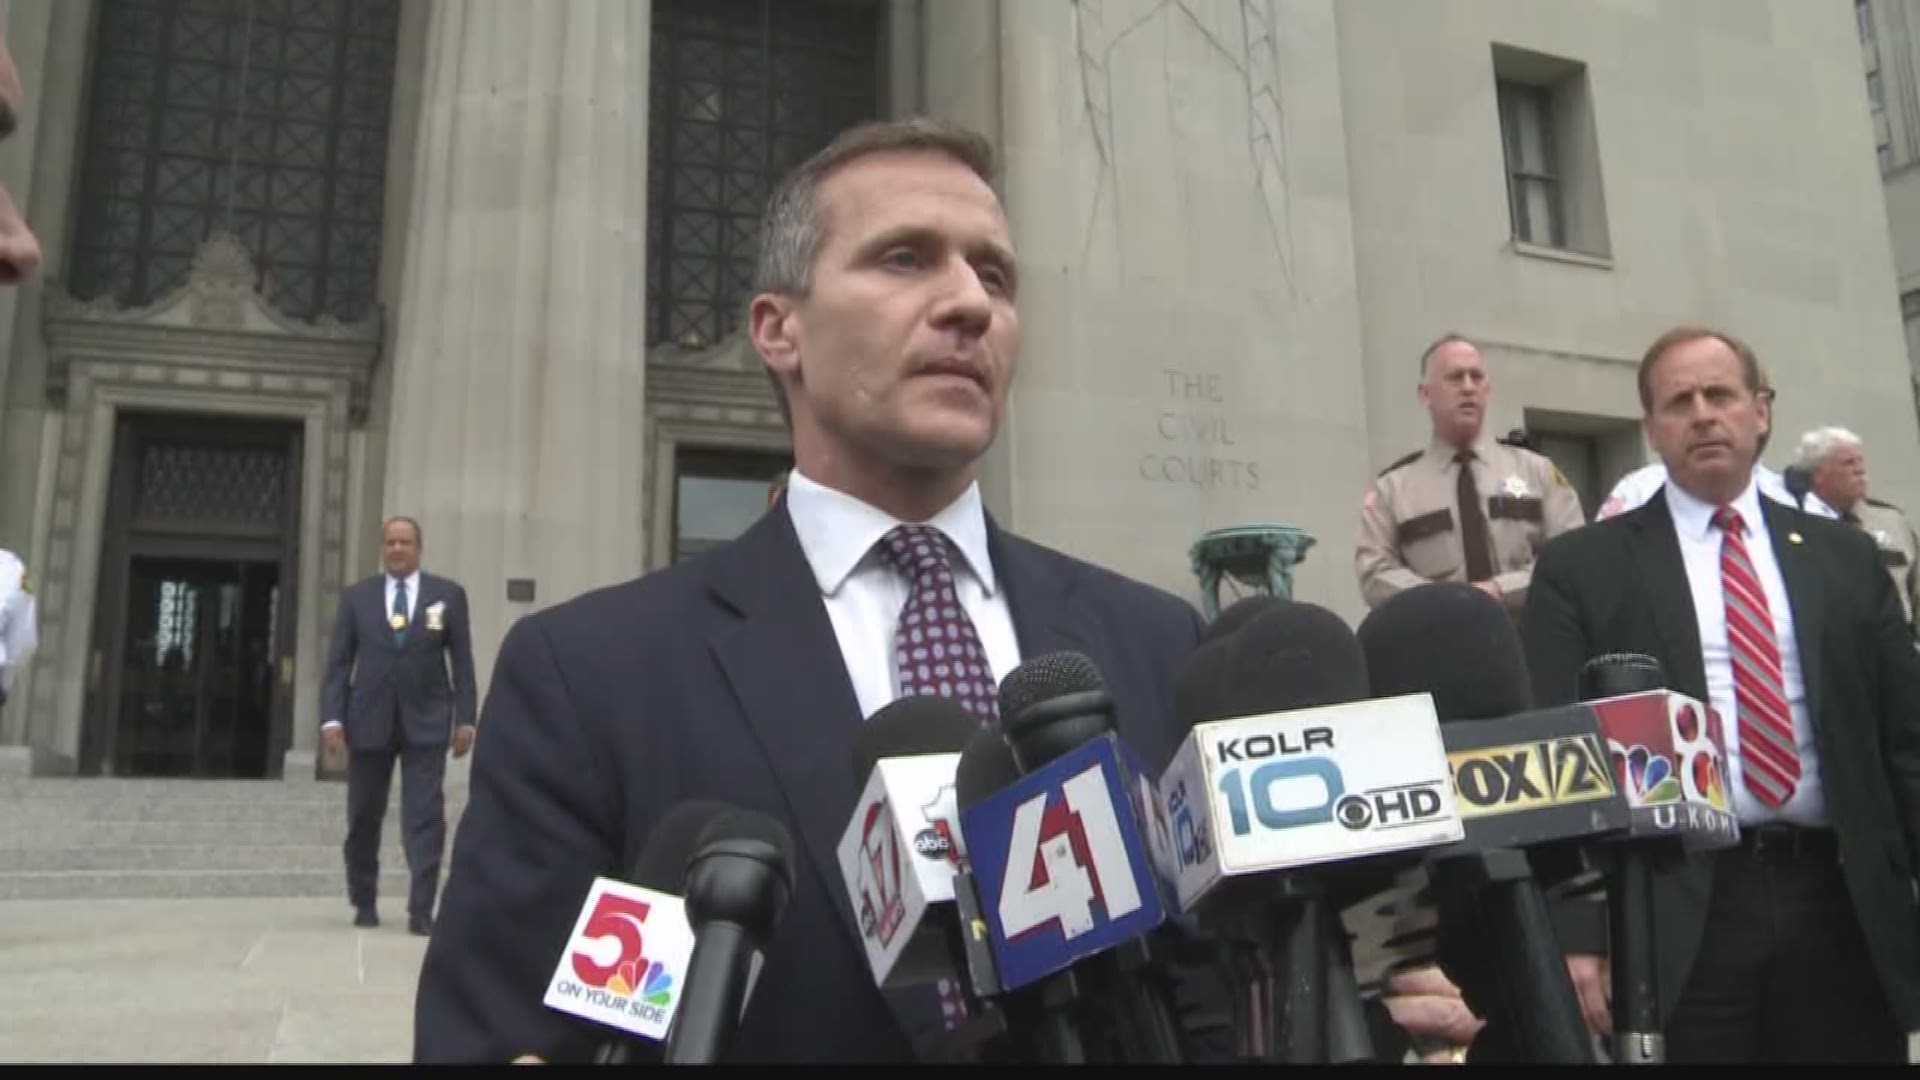 Governor Eric Greitens walked out of court with his felony invasion of privacy charge dropped.